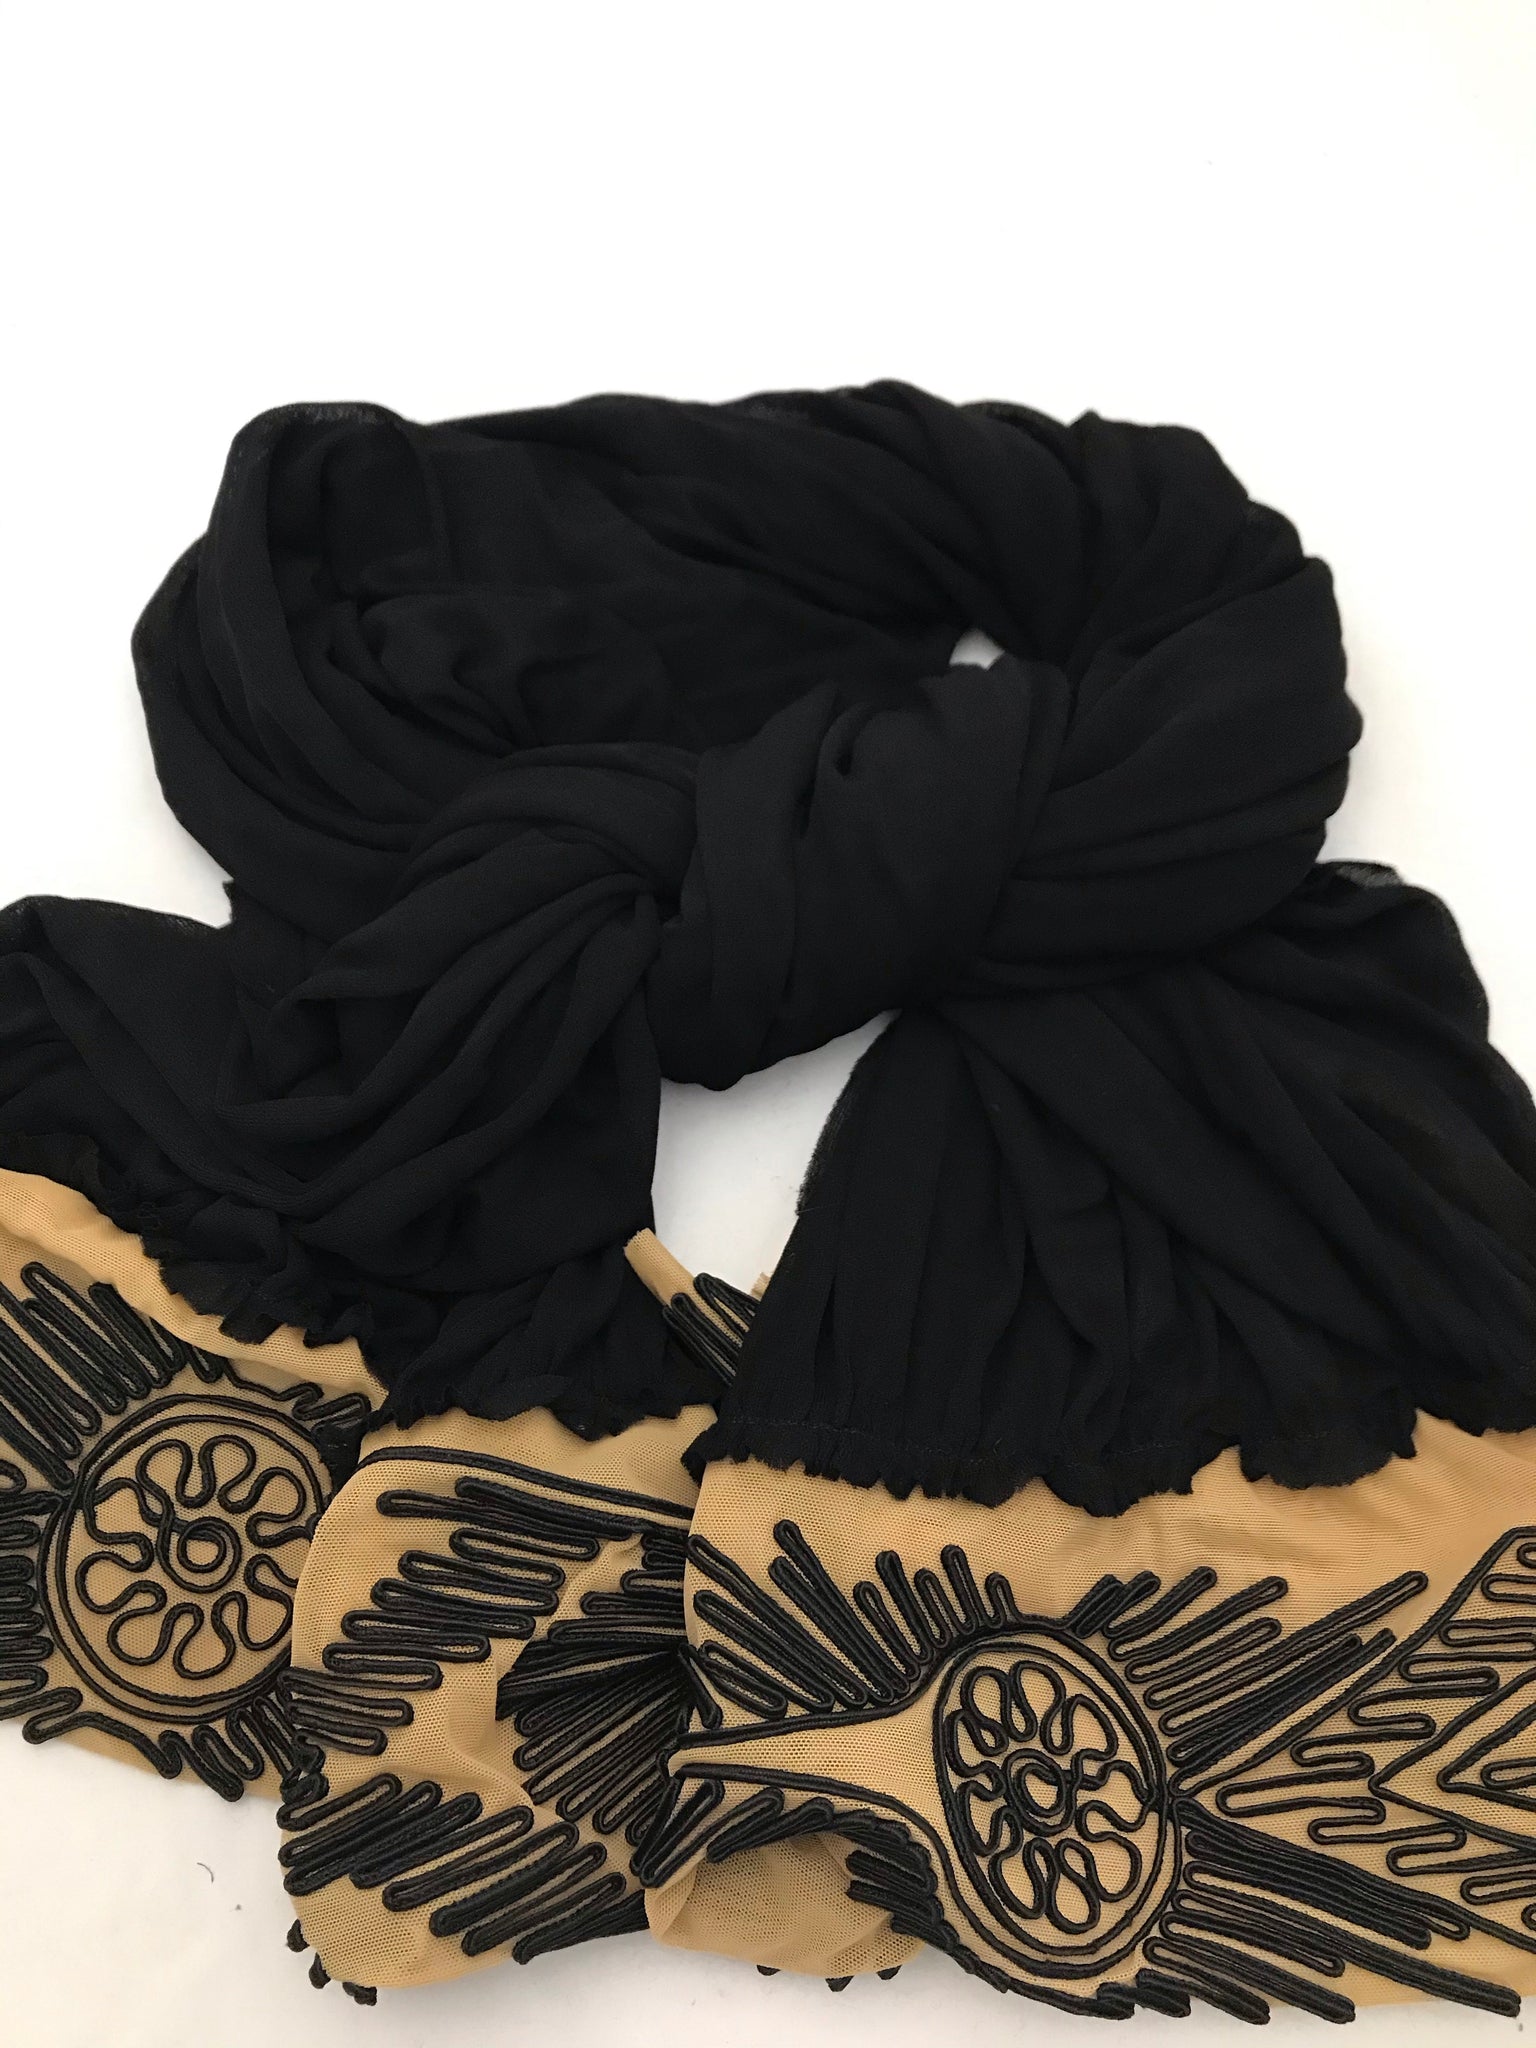 Isabella's Wardrobe Jean Paul Gaultier Embroidered Scarf.